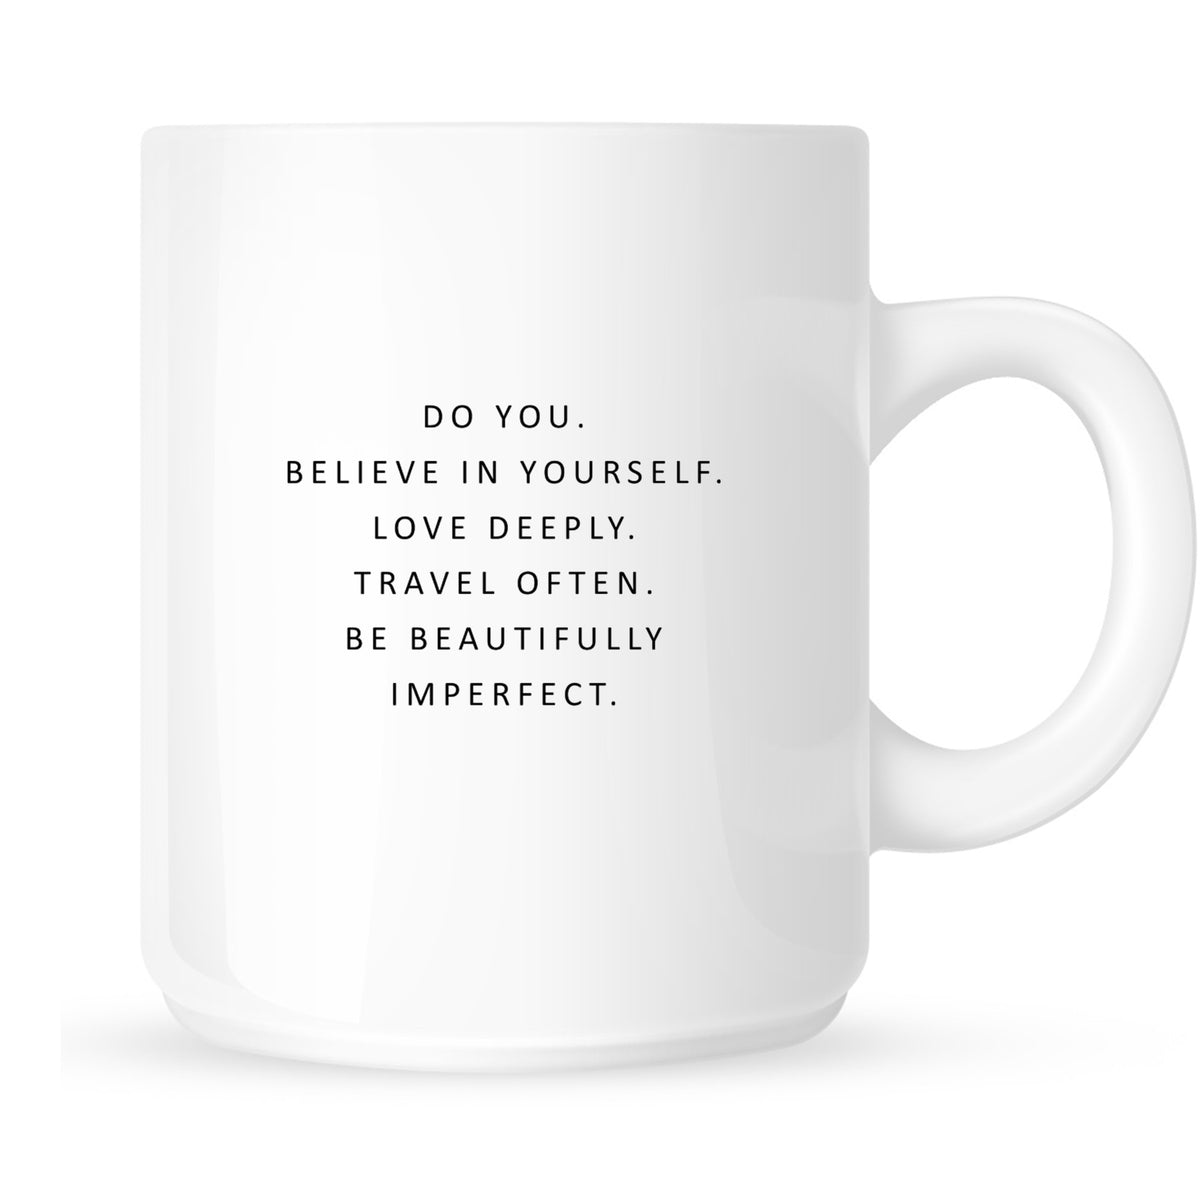 Mug - Do You. Believe in Yourself. Love Deeply. Travel Often. Be Beautifully Imperfect.